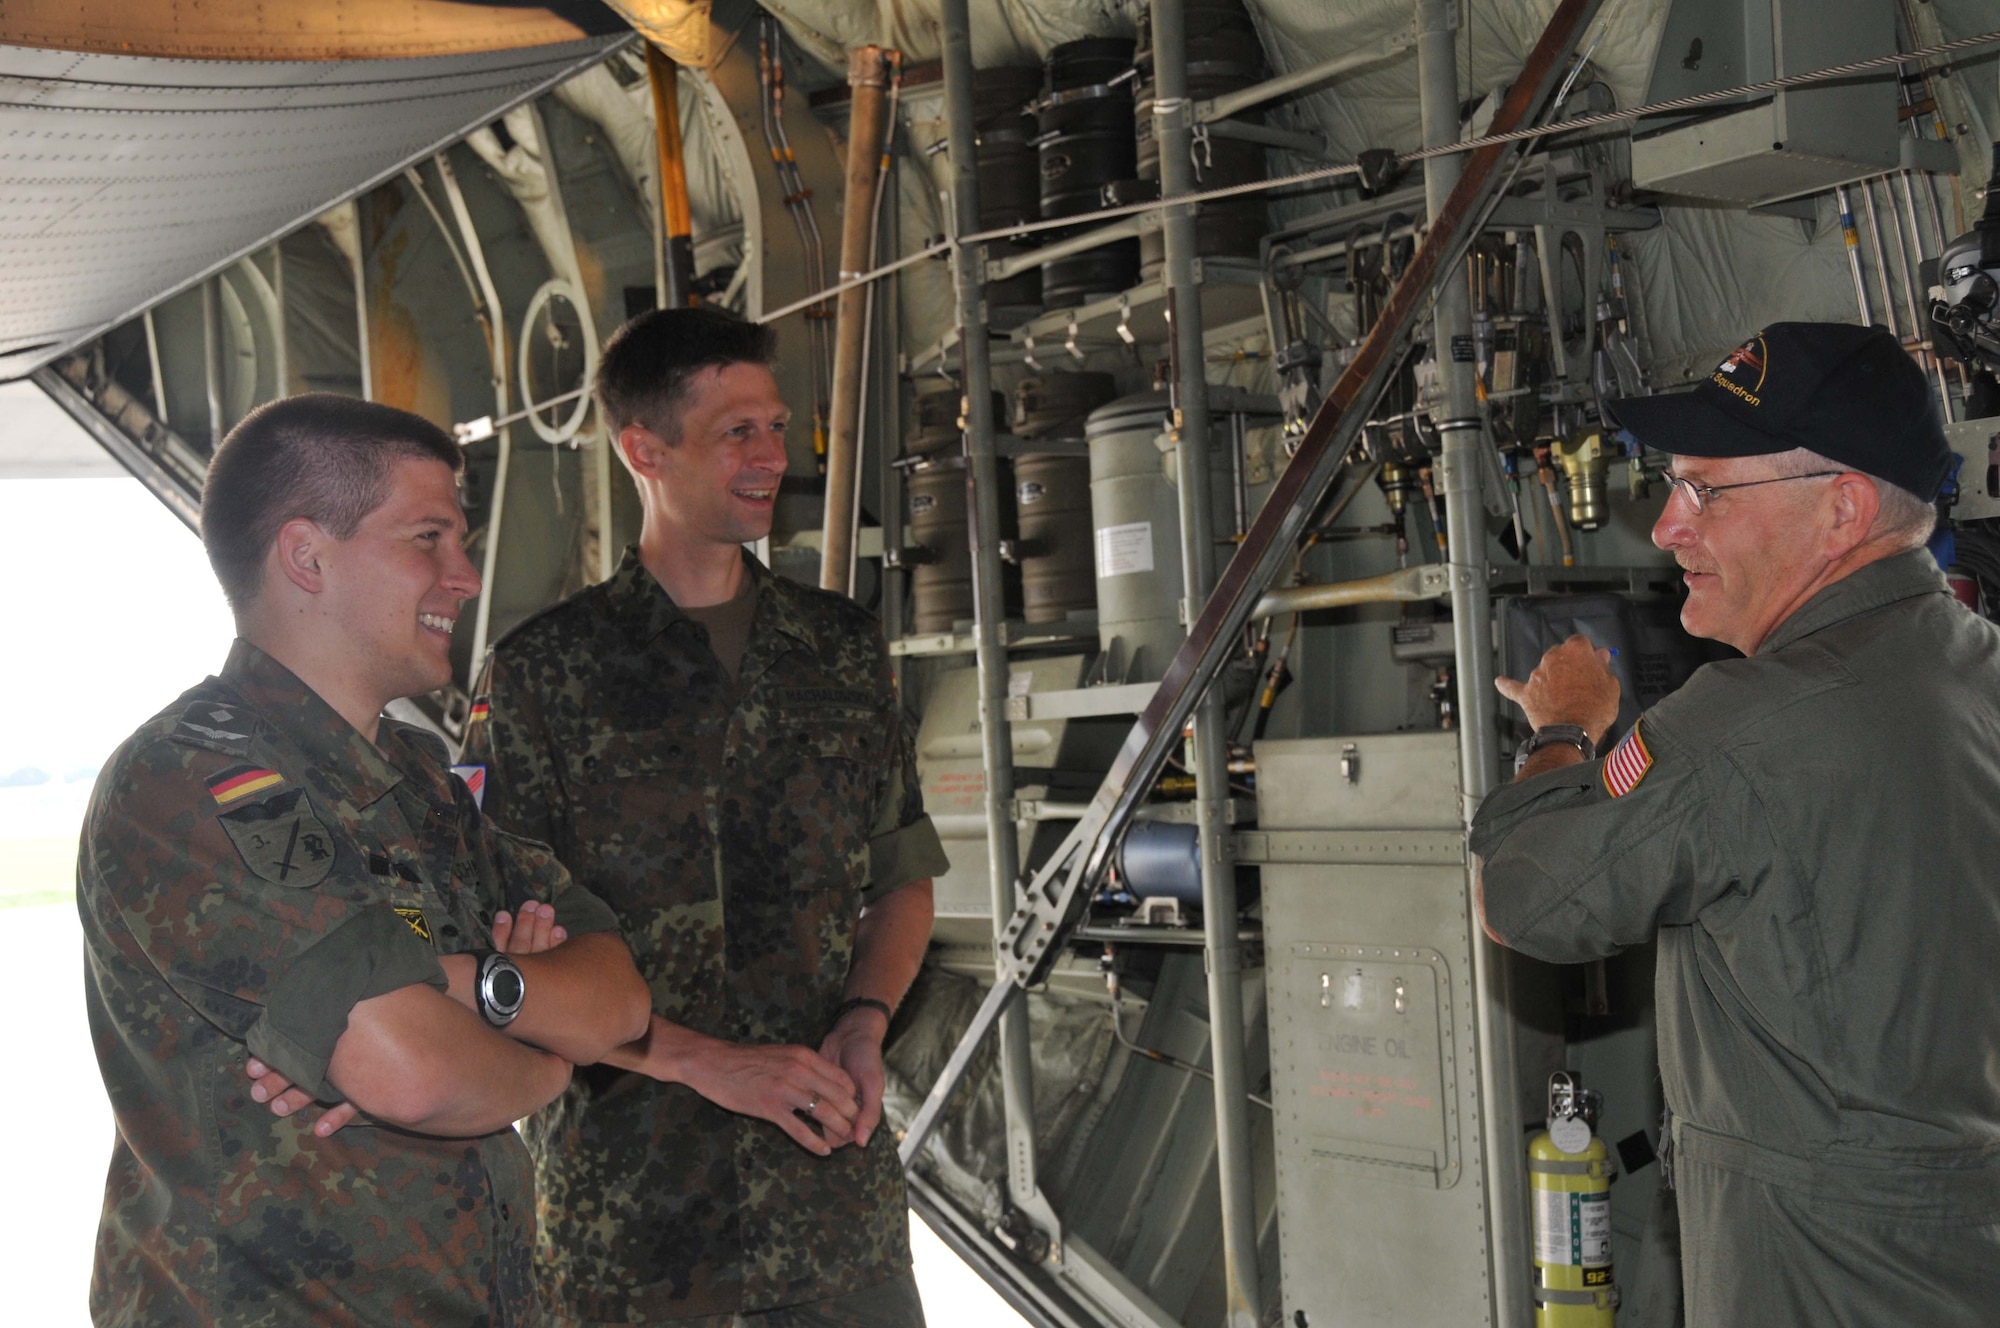 Master Sgt. Gary Scheff, 27th Aerial Port Squadron, talks about the features of the C-130 aircraft with German Air Force Reserve officers Capts. Axel Schmidt (left) and Ilja Machalowsky.  The officers are part of an exchange program which allows U.S. and foreign officers to experience similar duty functions with the services of other countries. (Air Force Photo/Master Sgt. Kerry Bartlett) 